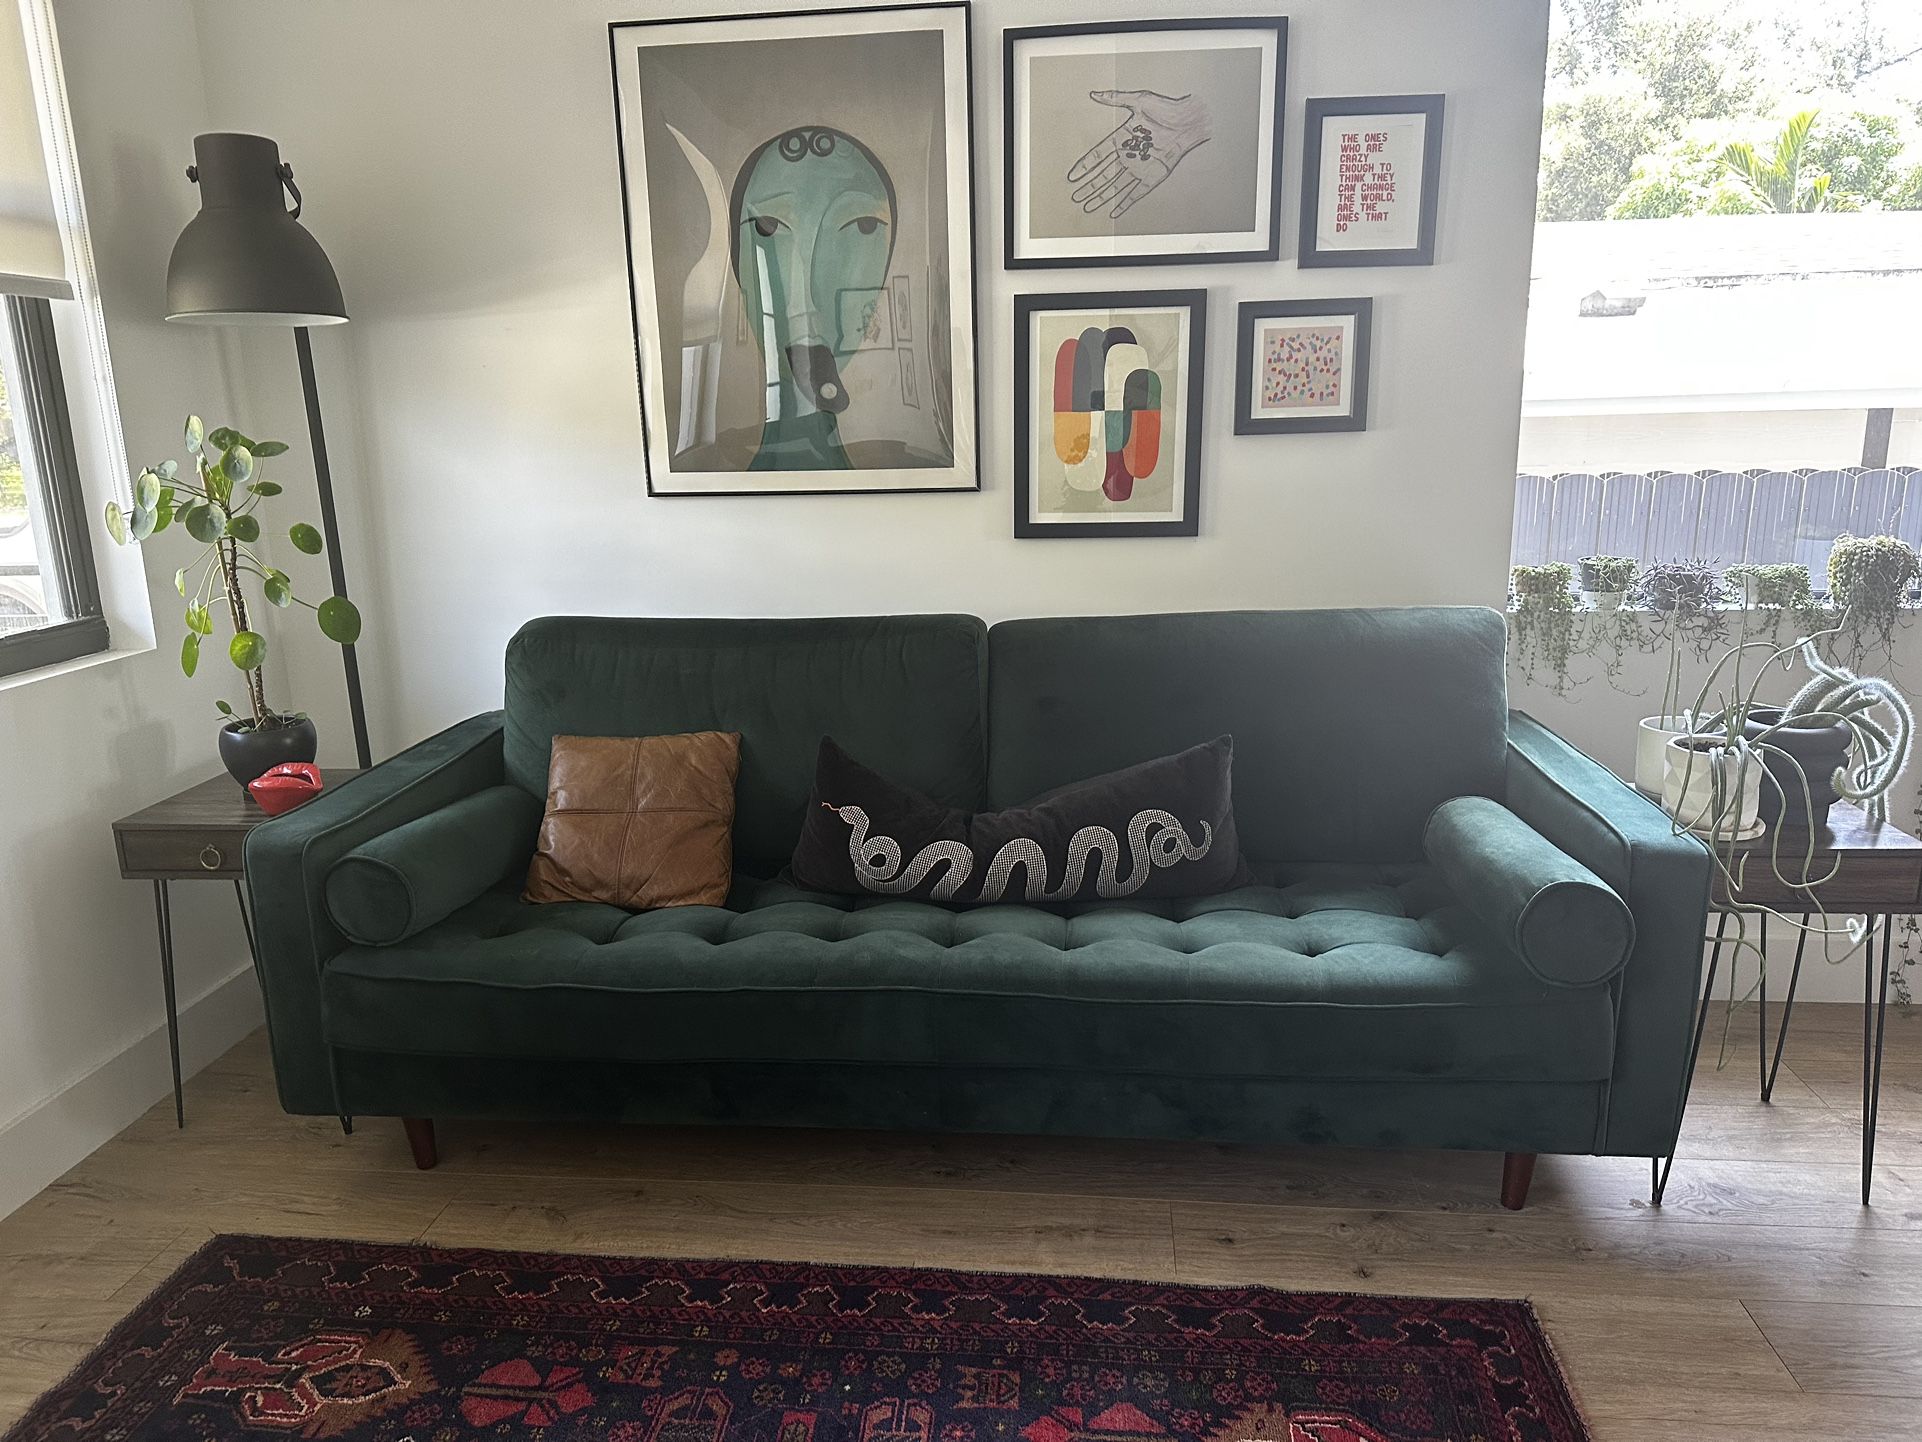 Green Velvet Couch and Wingback Chair And Ottoman. Excellent Condition.